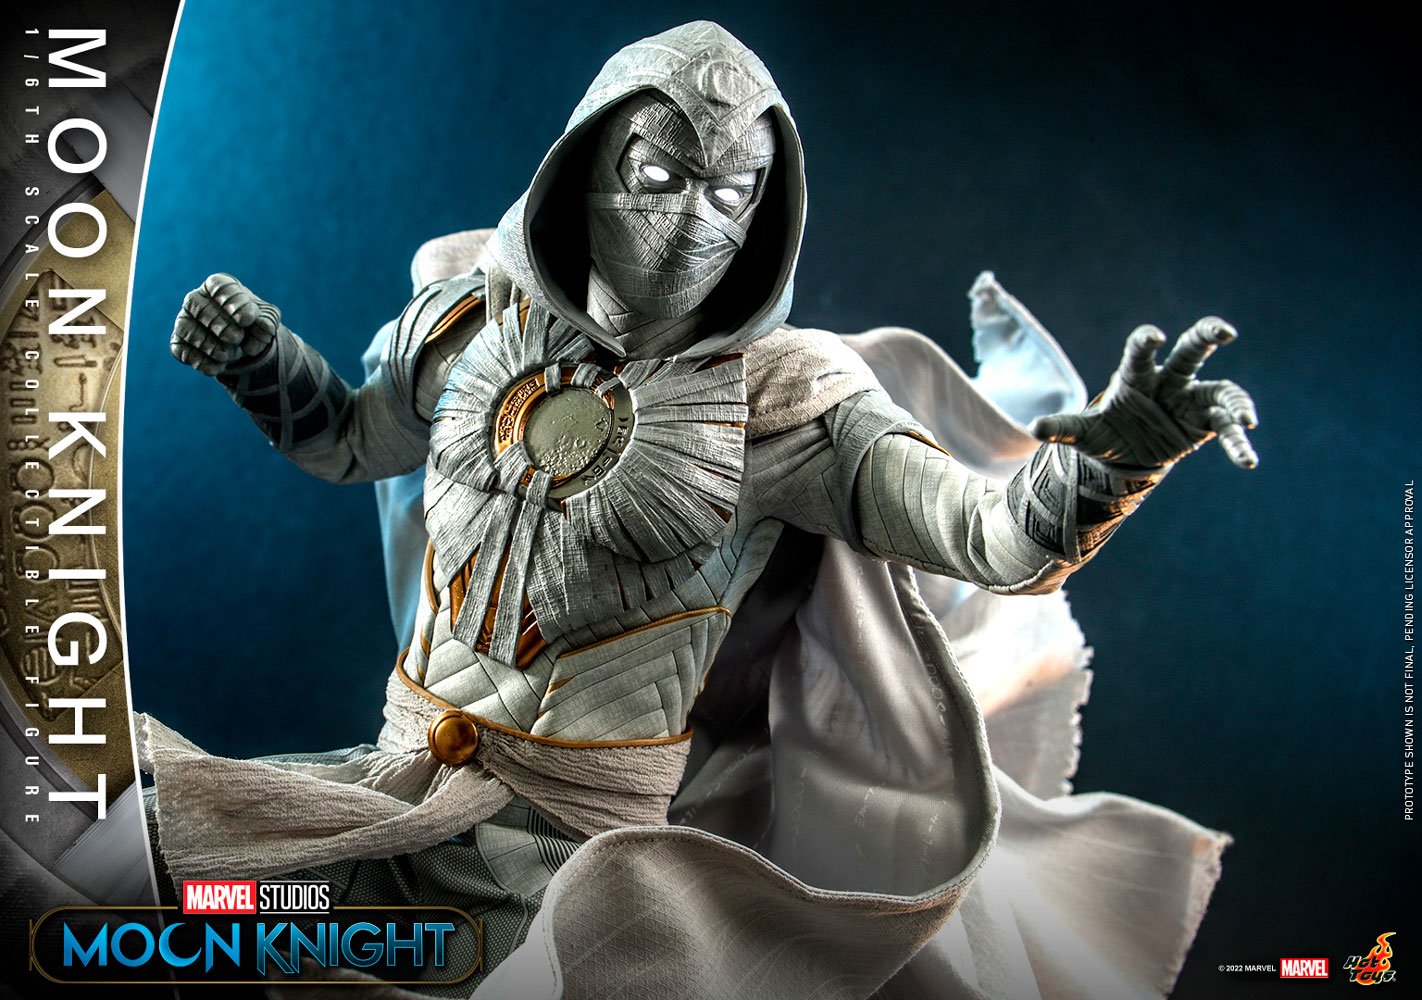 Moon Knight Sixth Scale Figure by Hot Toys | Sideshow Collectibles